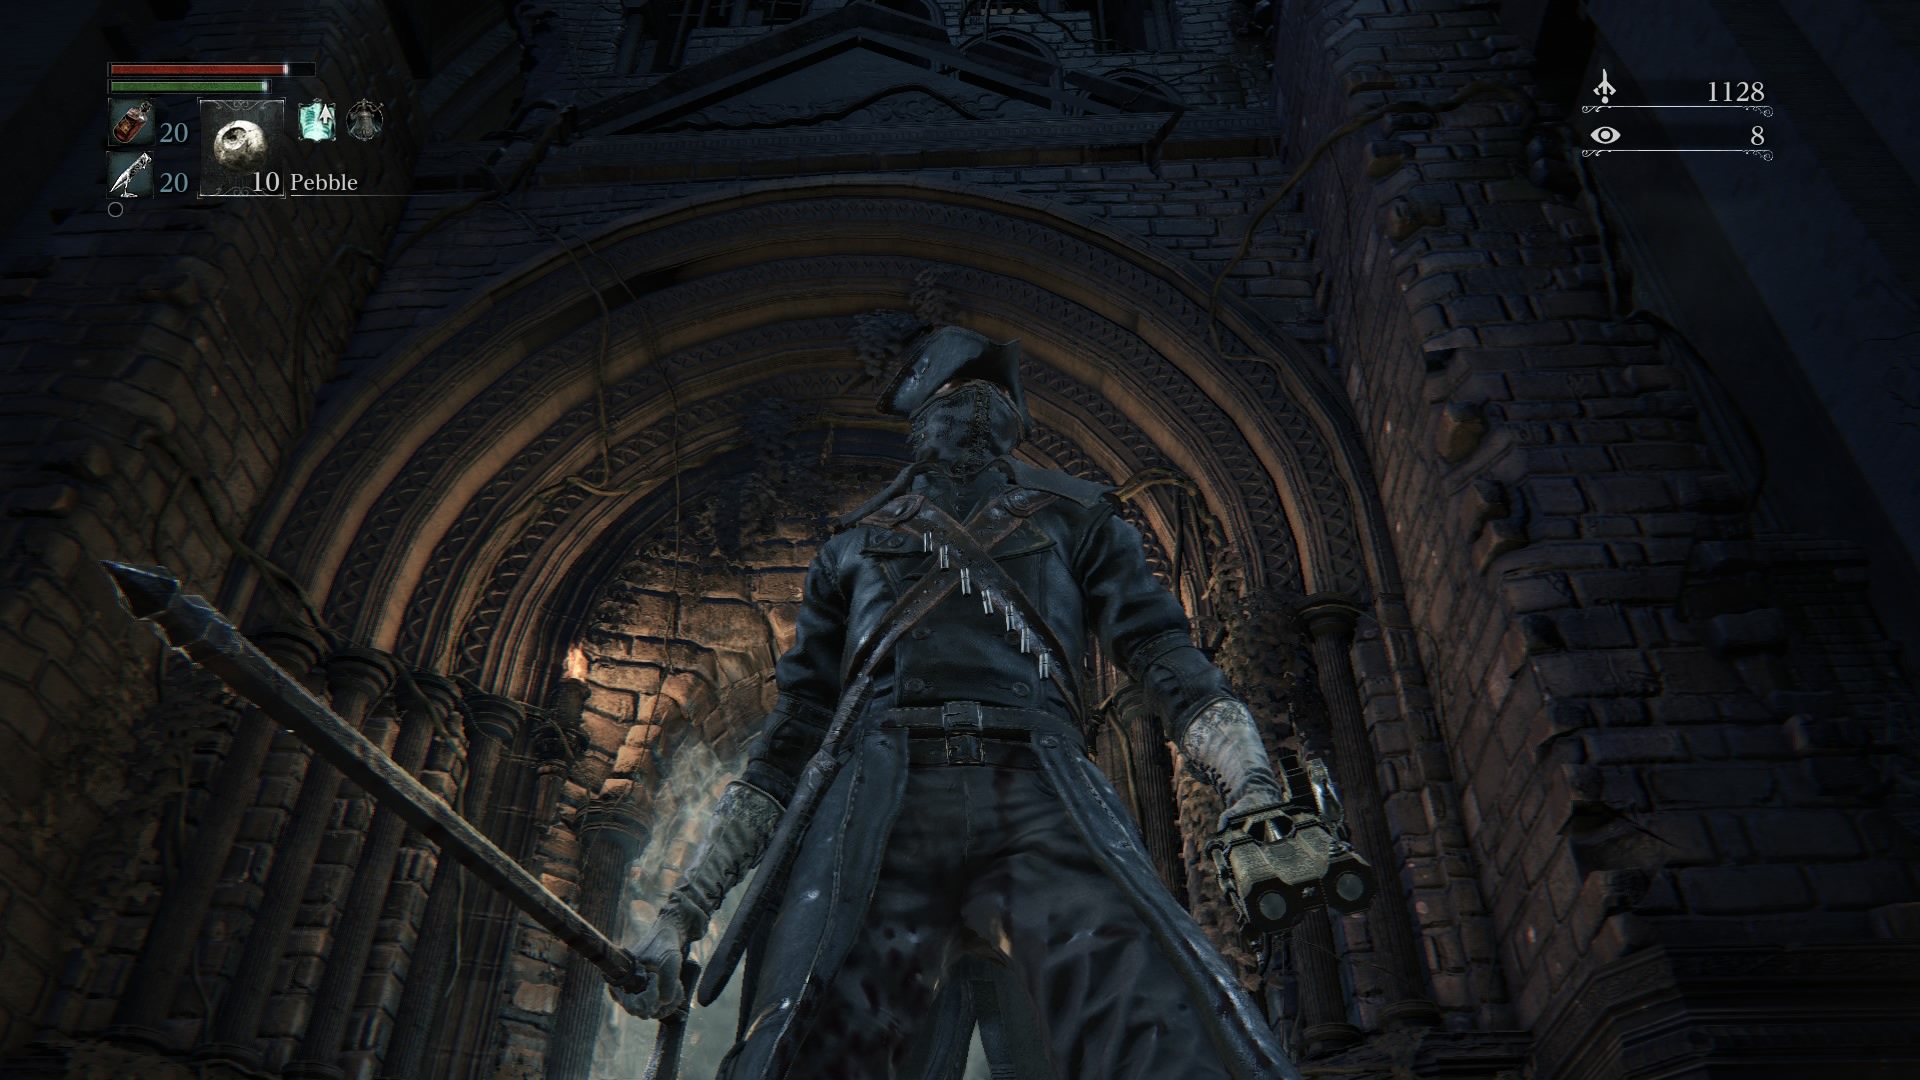 Bloodborne (PS4) review: Say hello to the most unforgiving PS4 game to date  - CNET